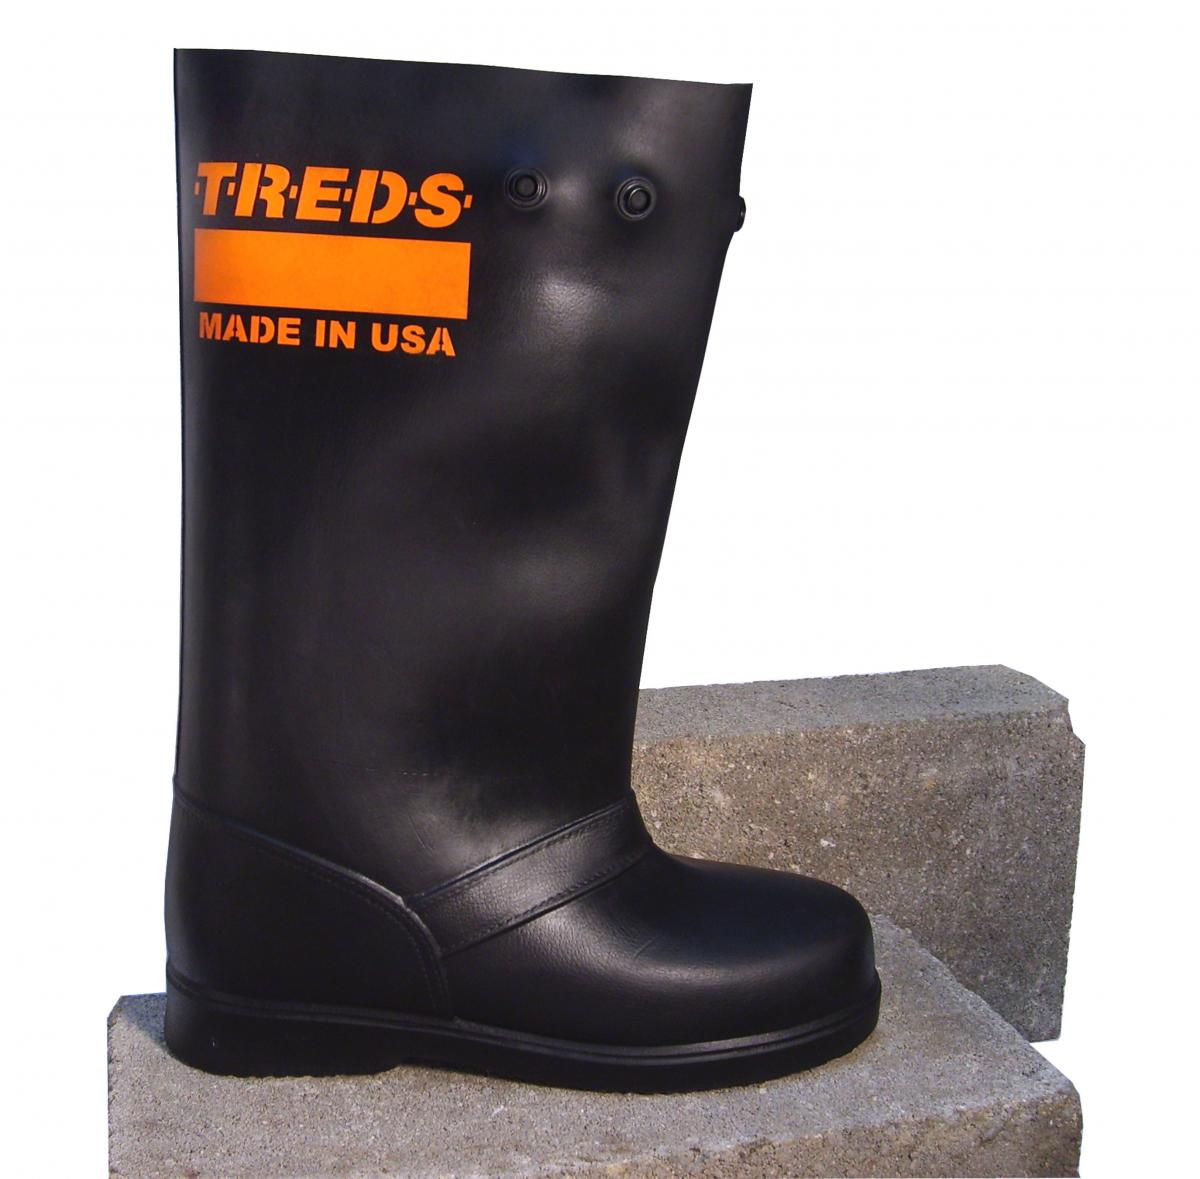 concrete boot covers